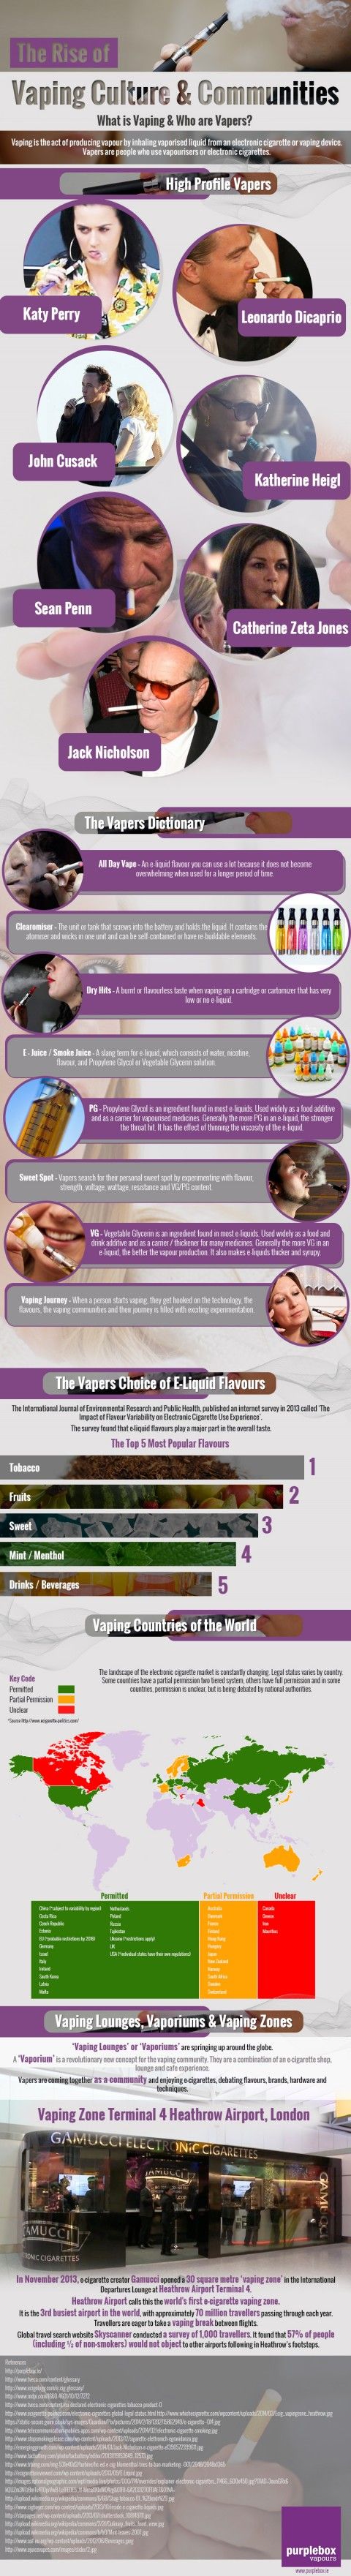 Rise-of-vaping-culture-and-communities-infographic